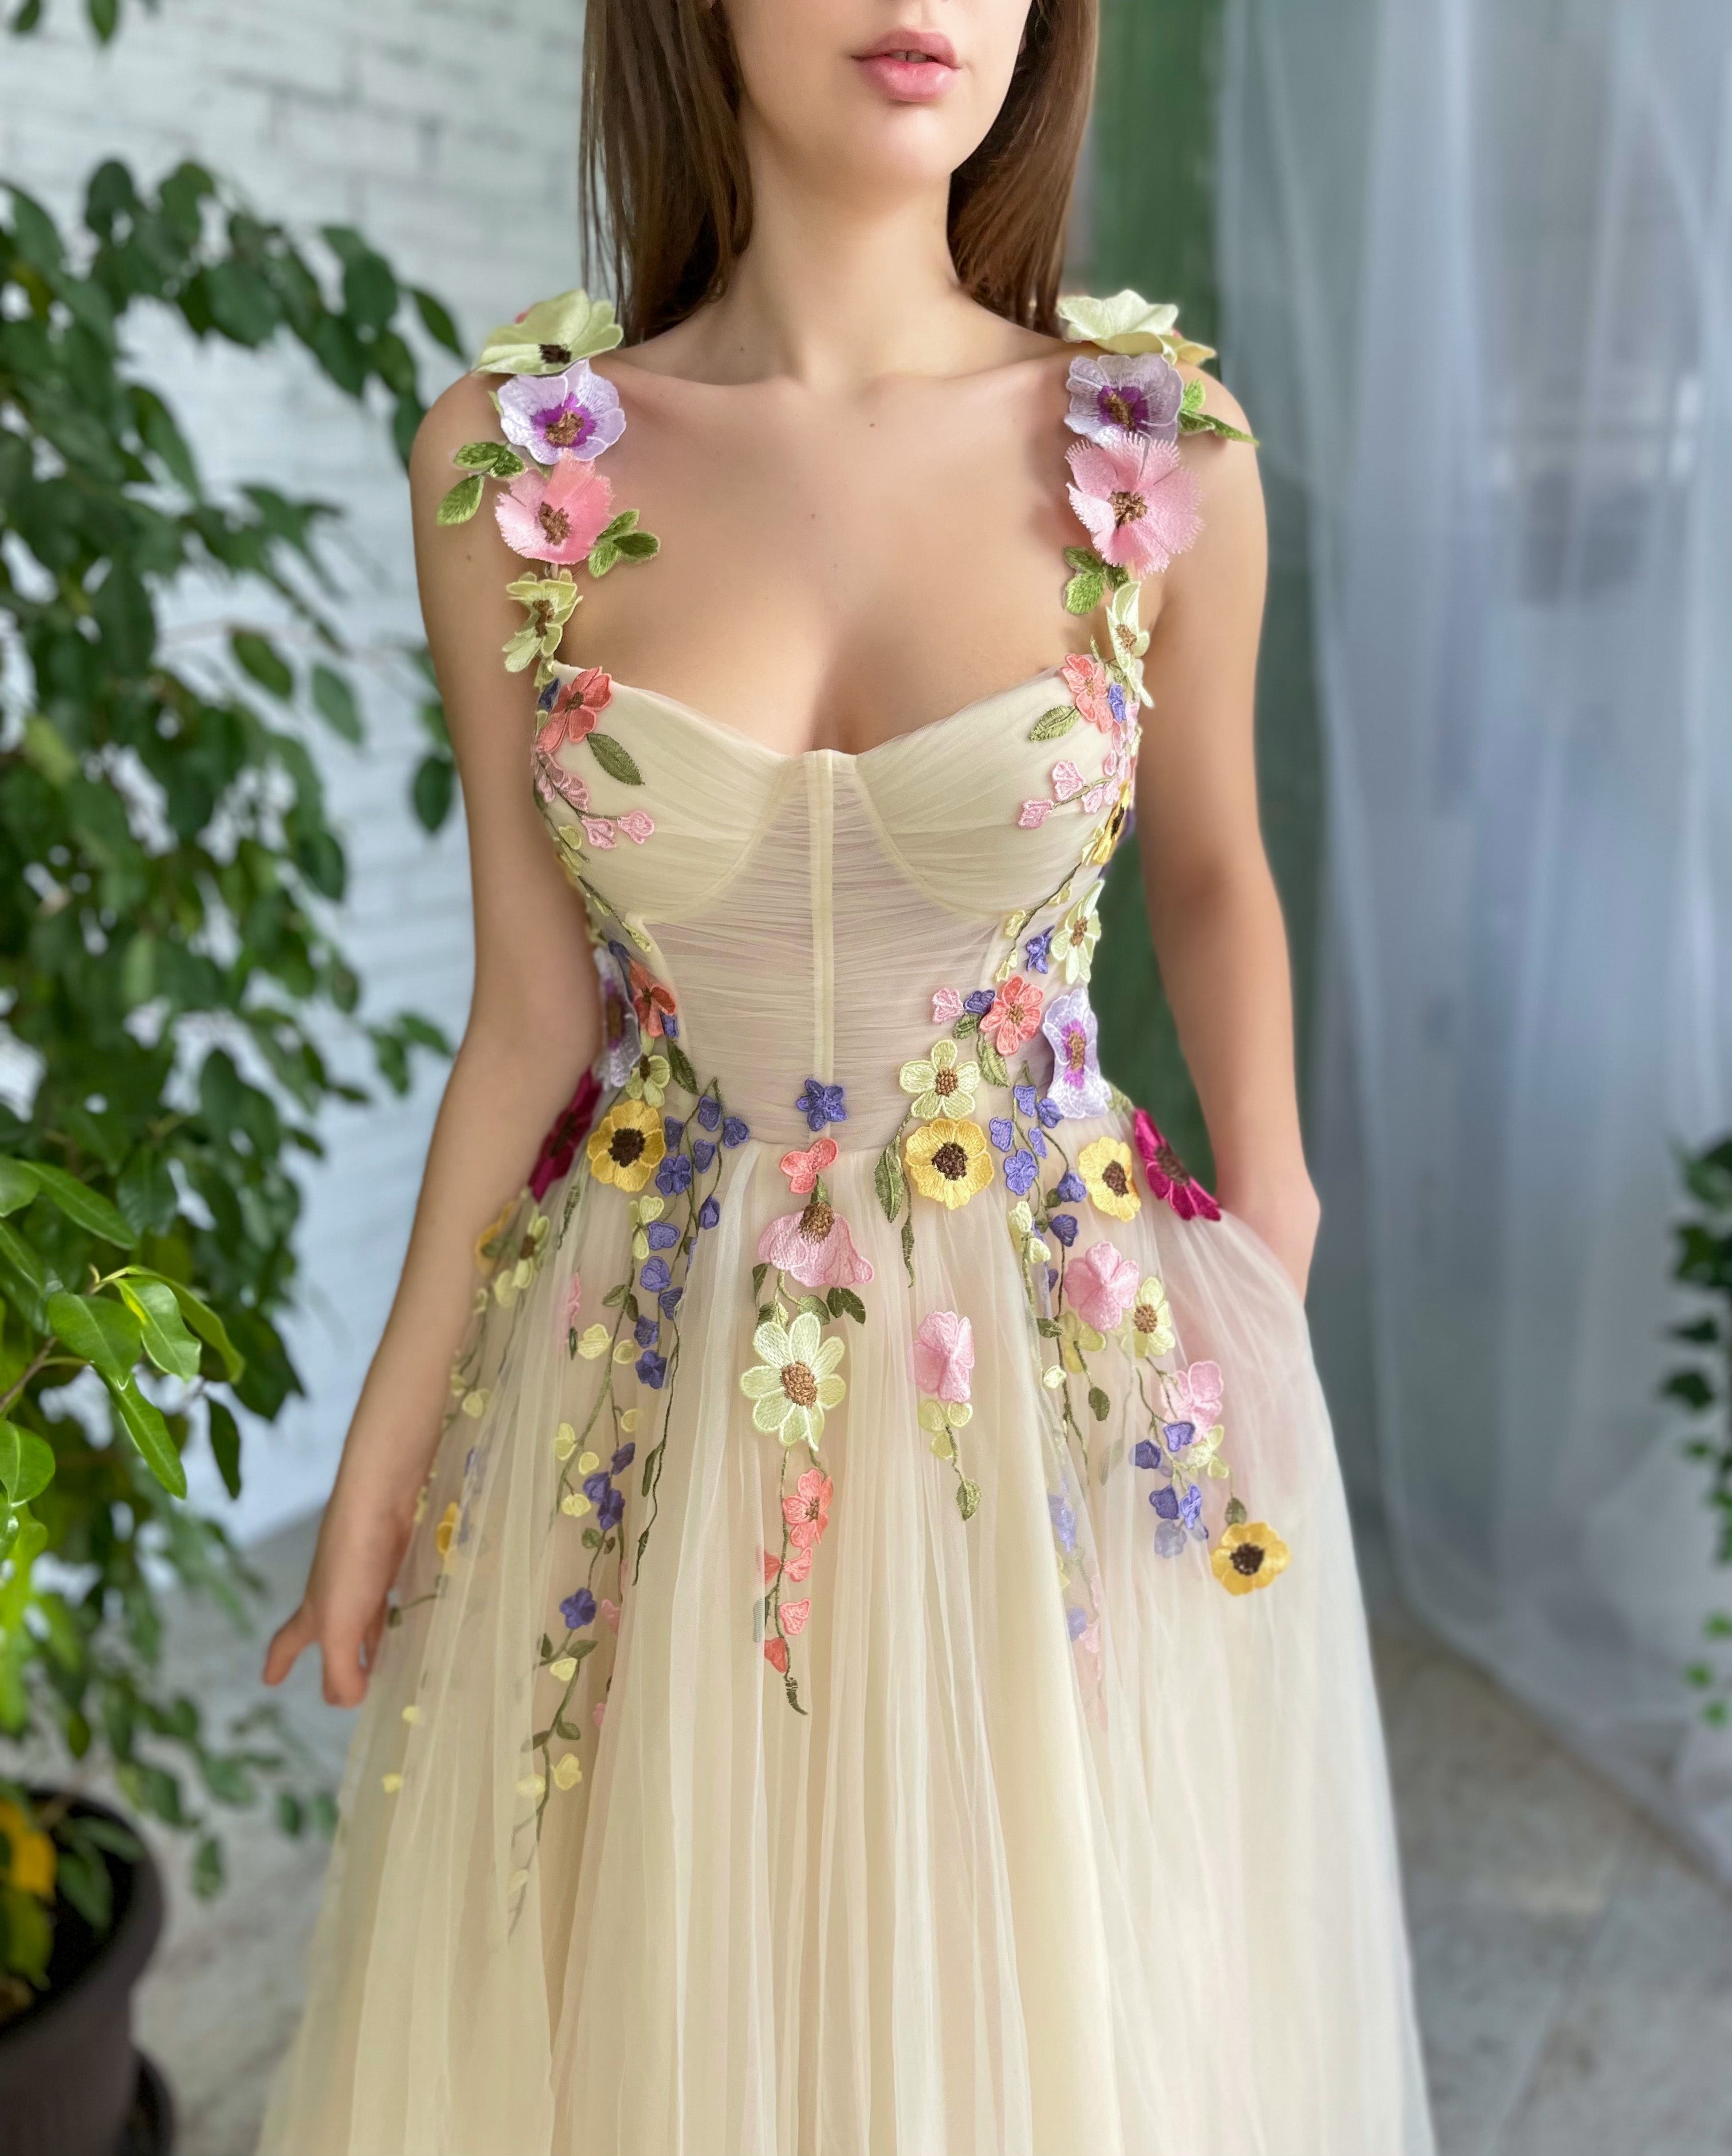 Beige midi dress with spaghetti straps, embroidery and flowers